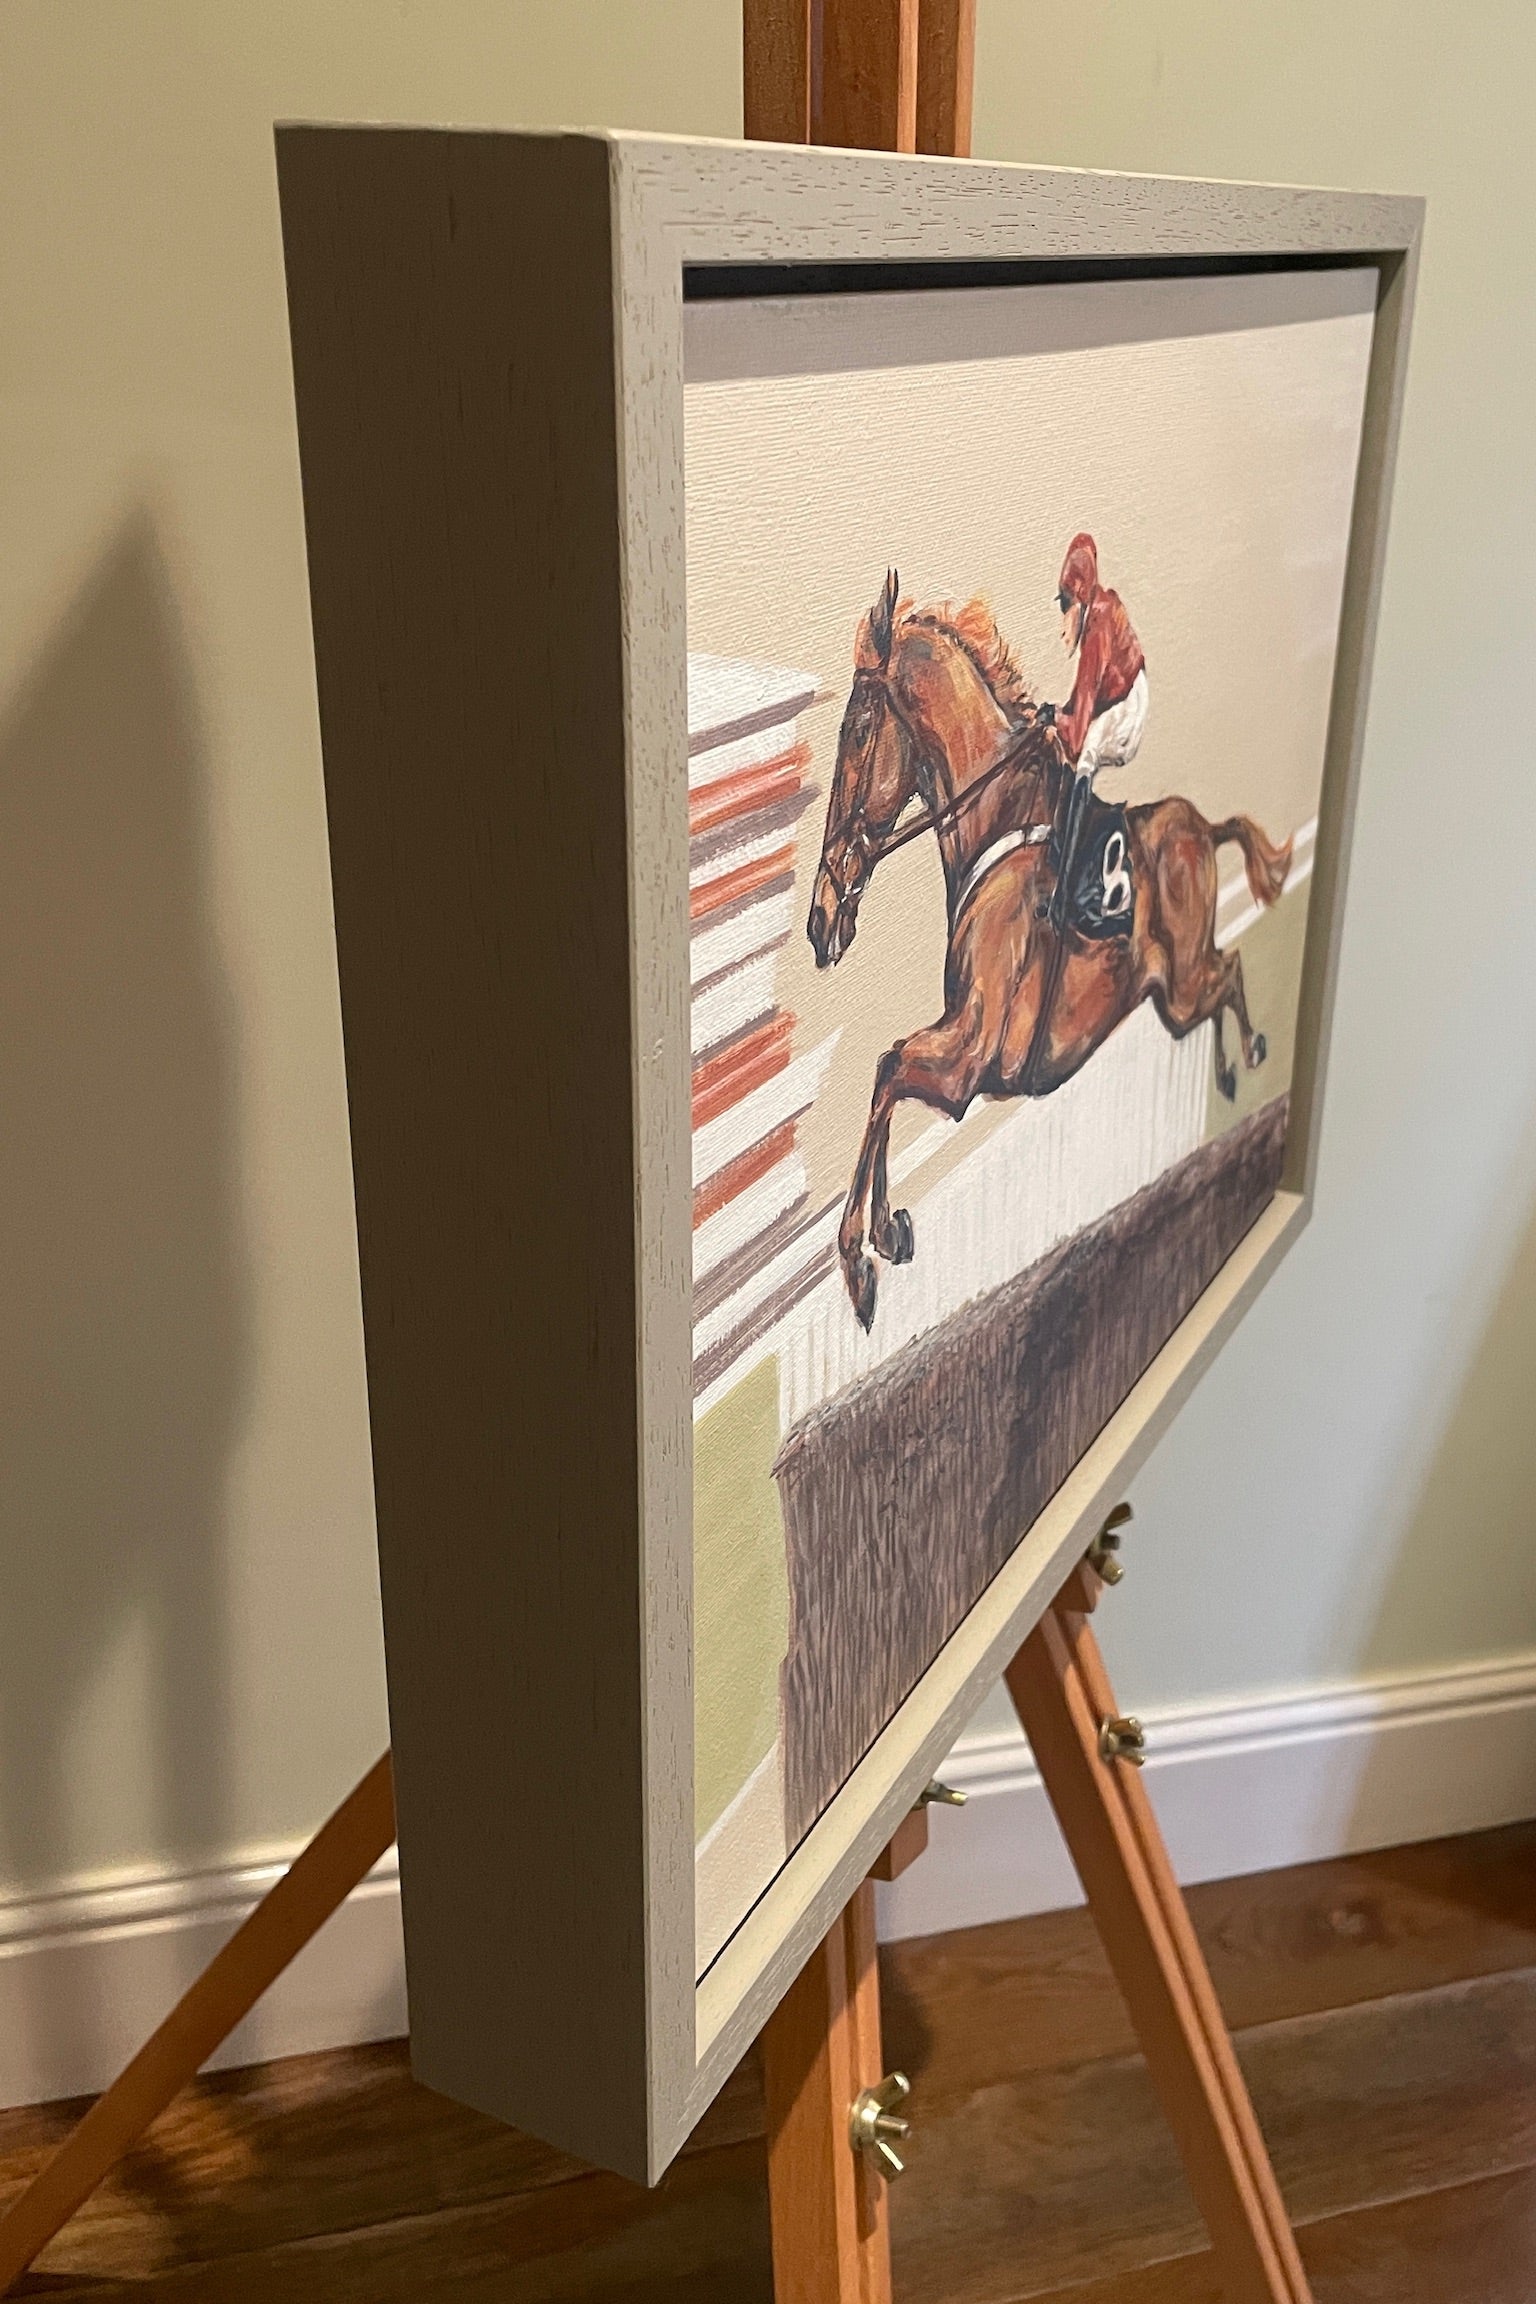 This painting has a racehorse over jumps as the subject.  Power Surge depicts the power of the horse jumping at speed.